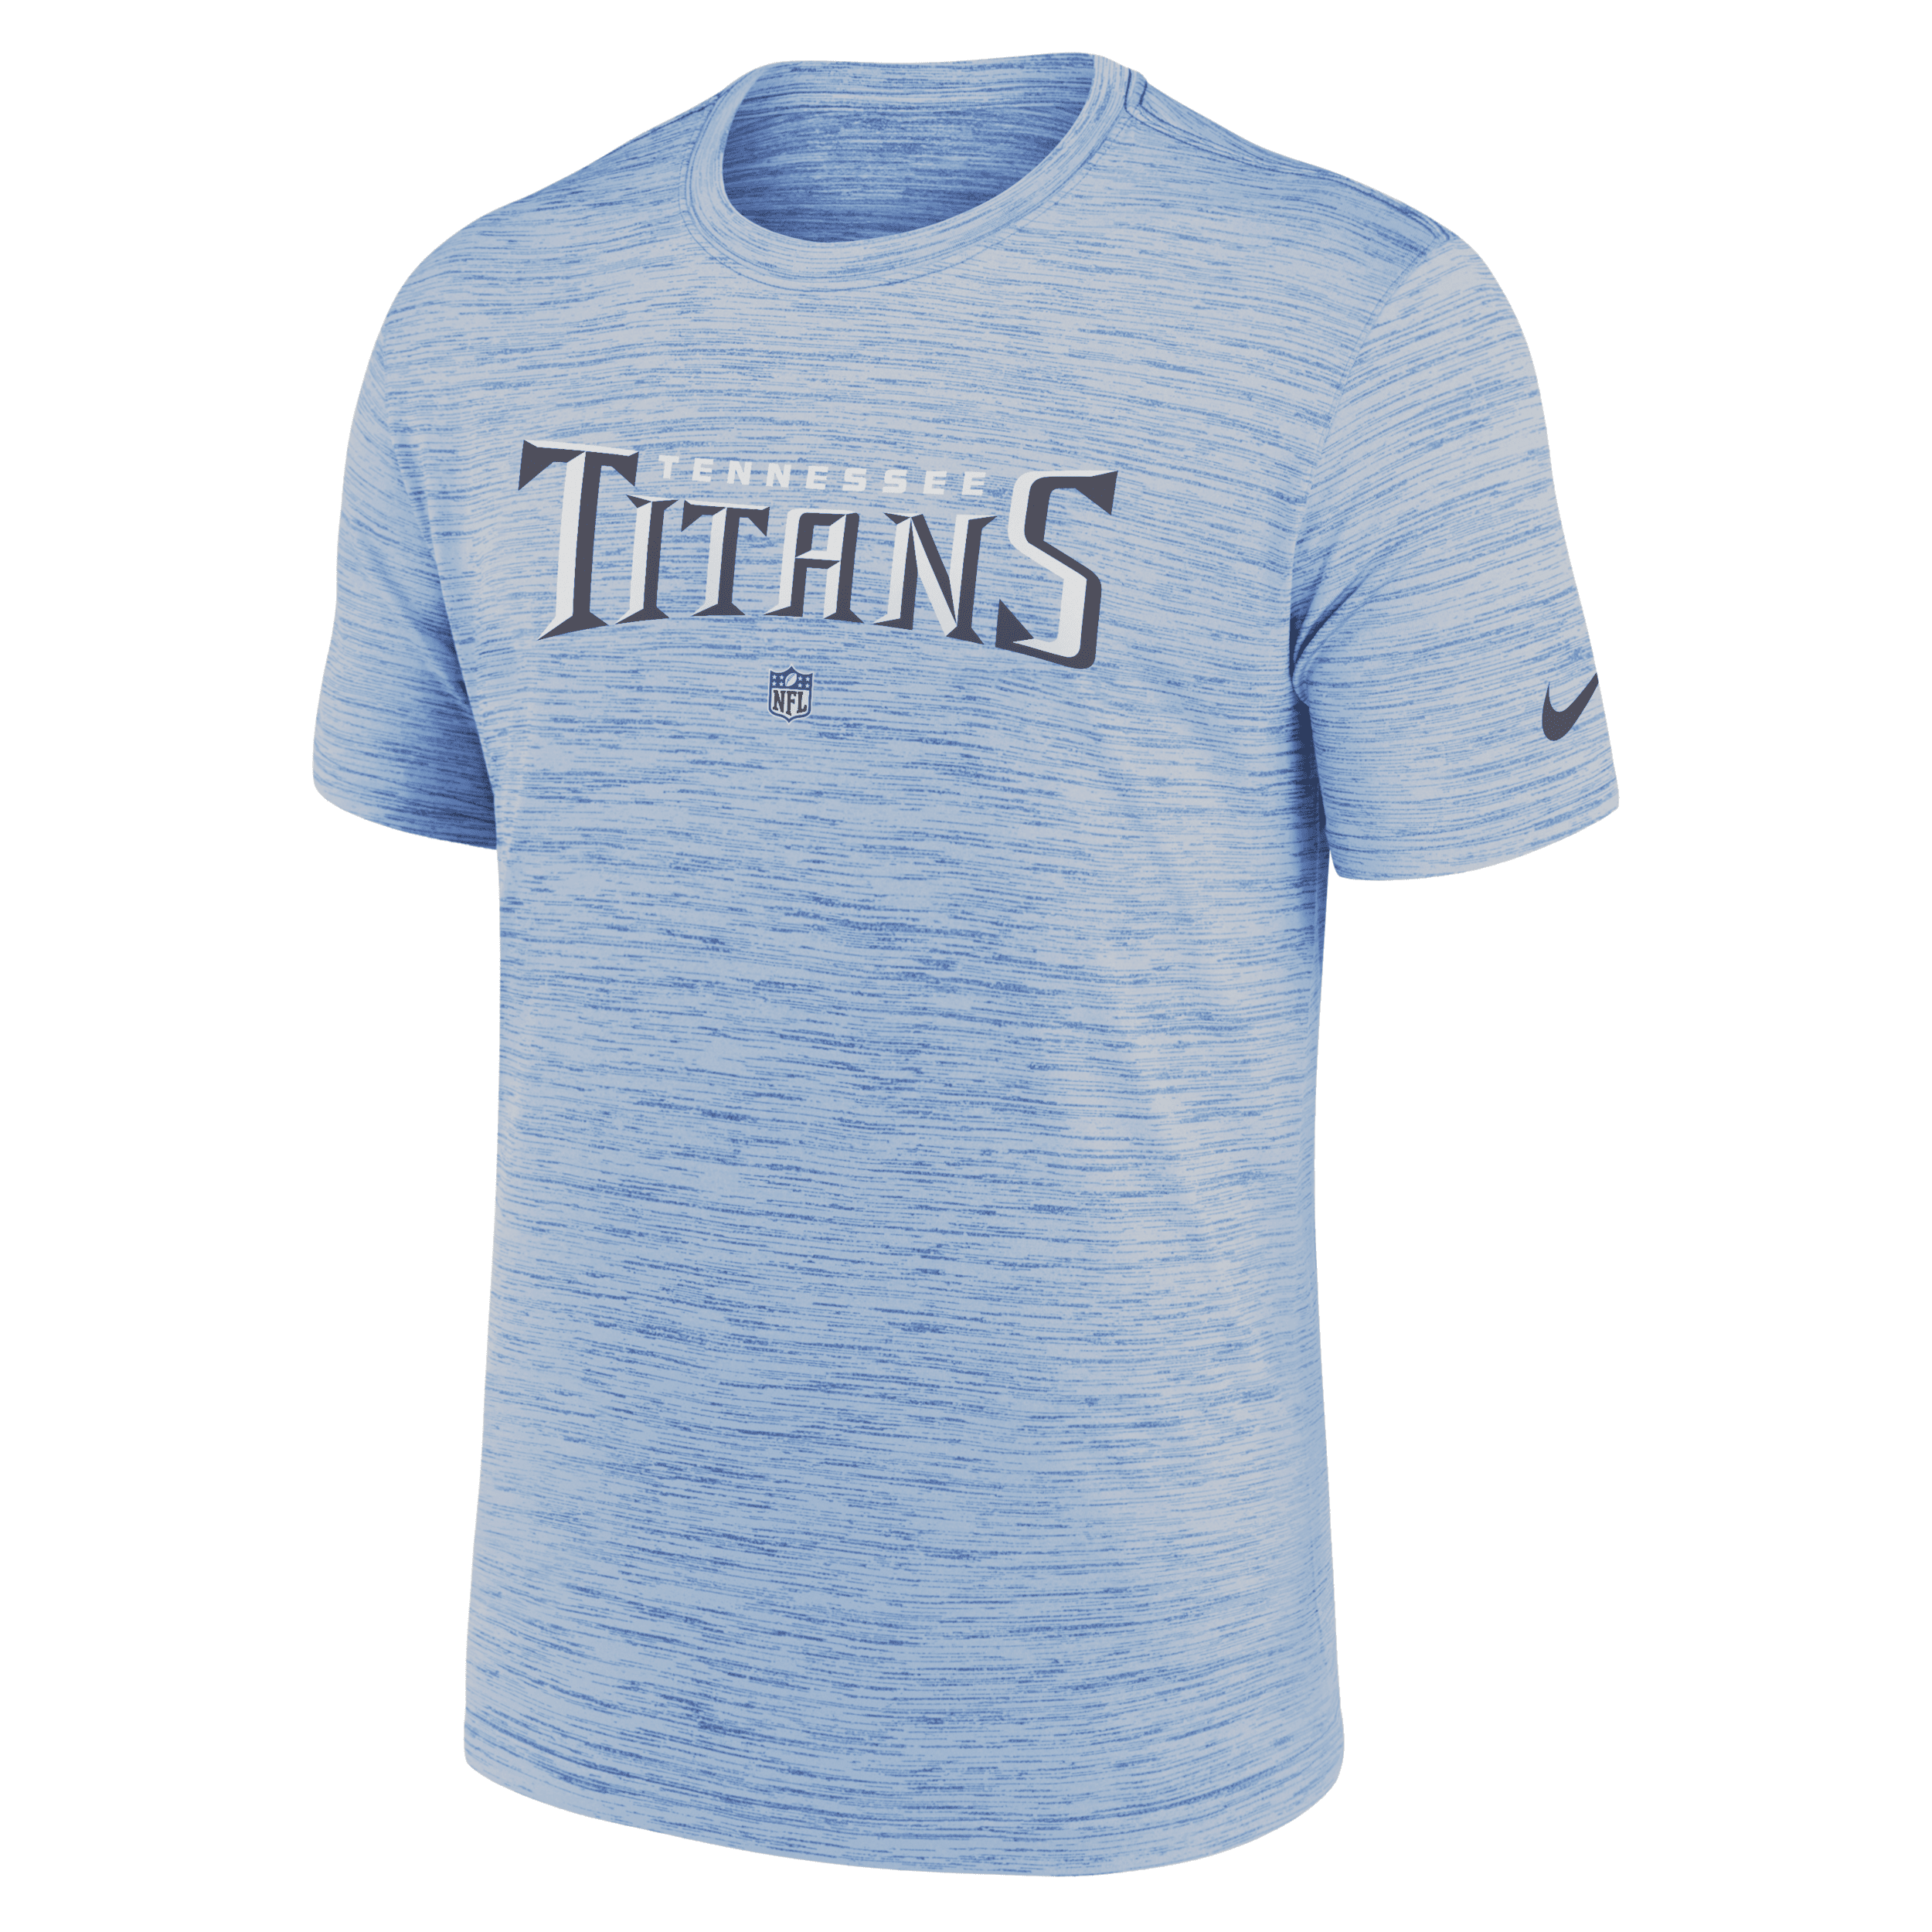 Nike Women's Dri-fit Sideline Velocity (nfl Tennessee Titans) T-shirt In Blue